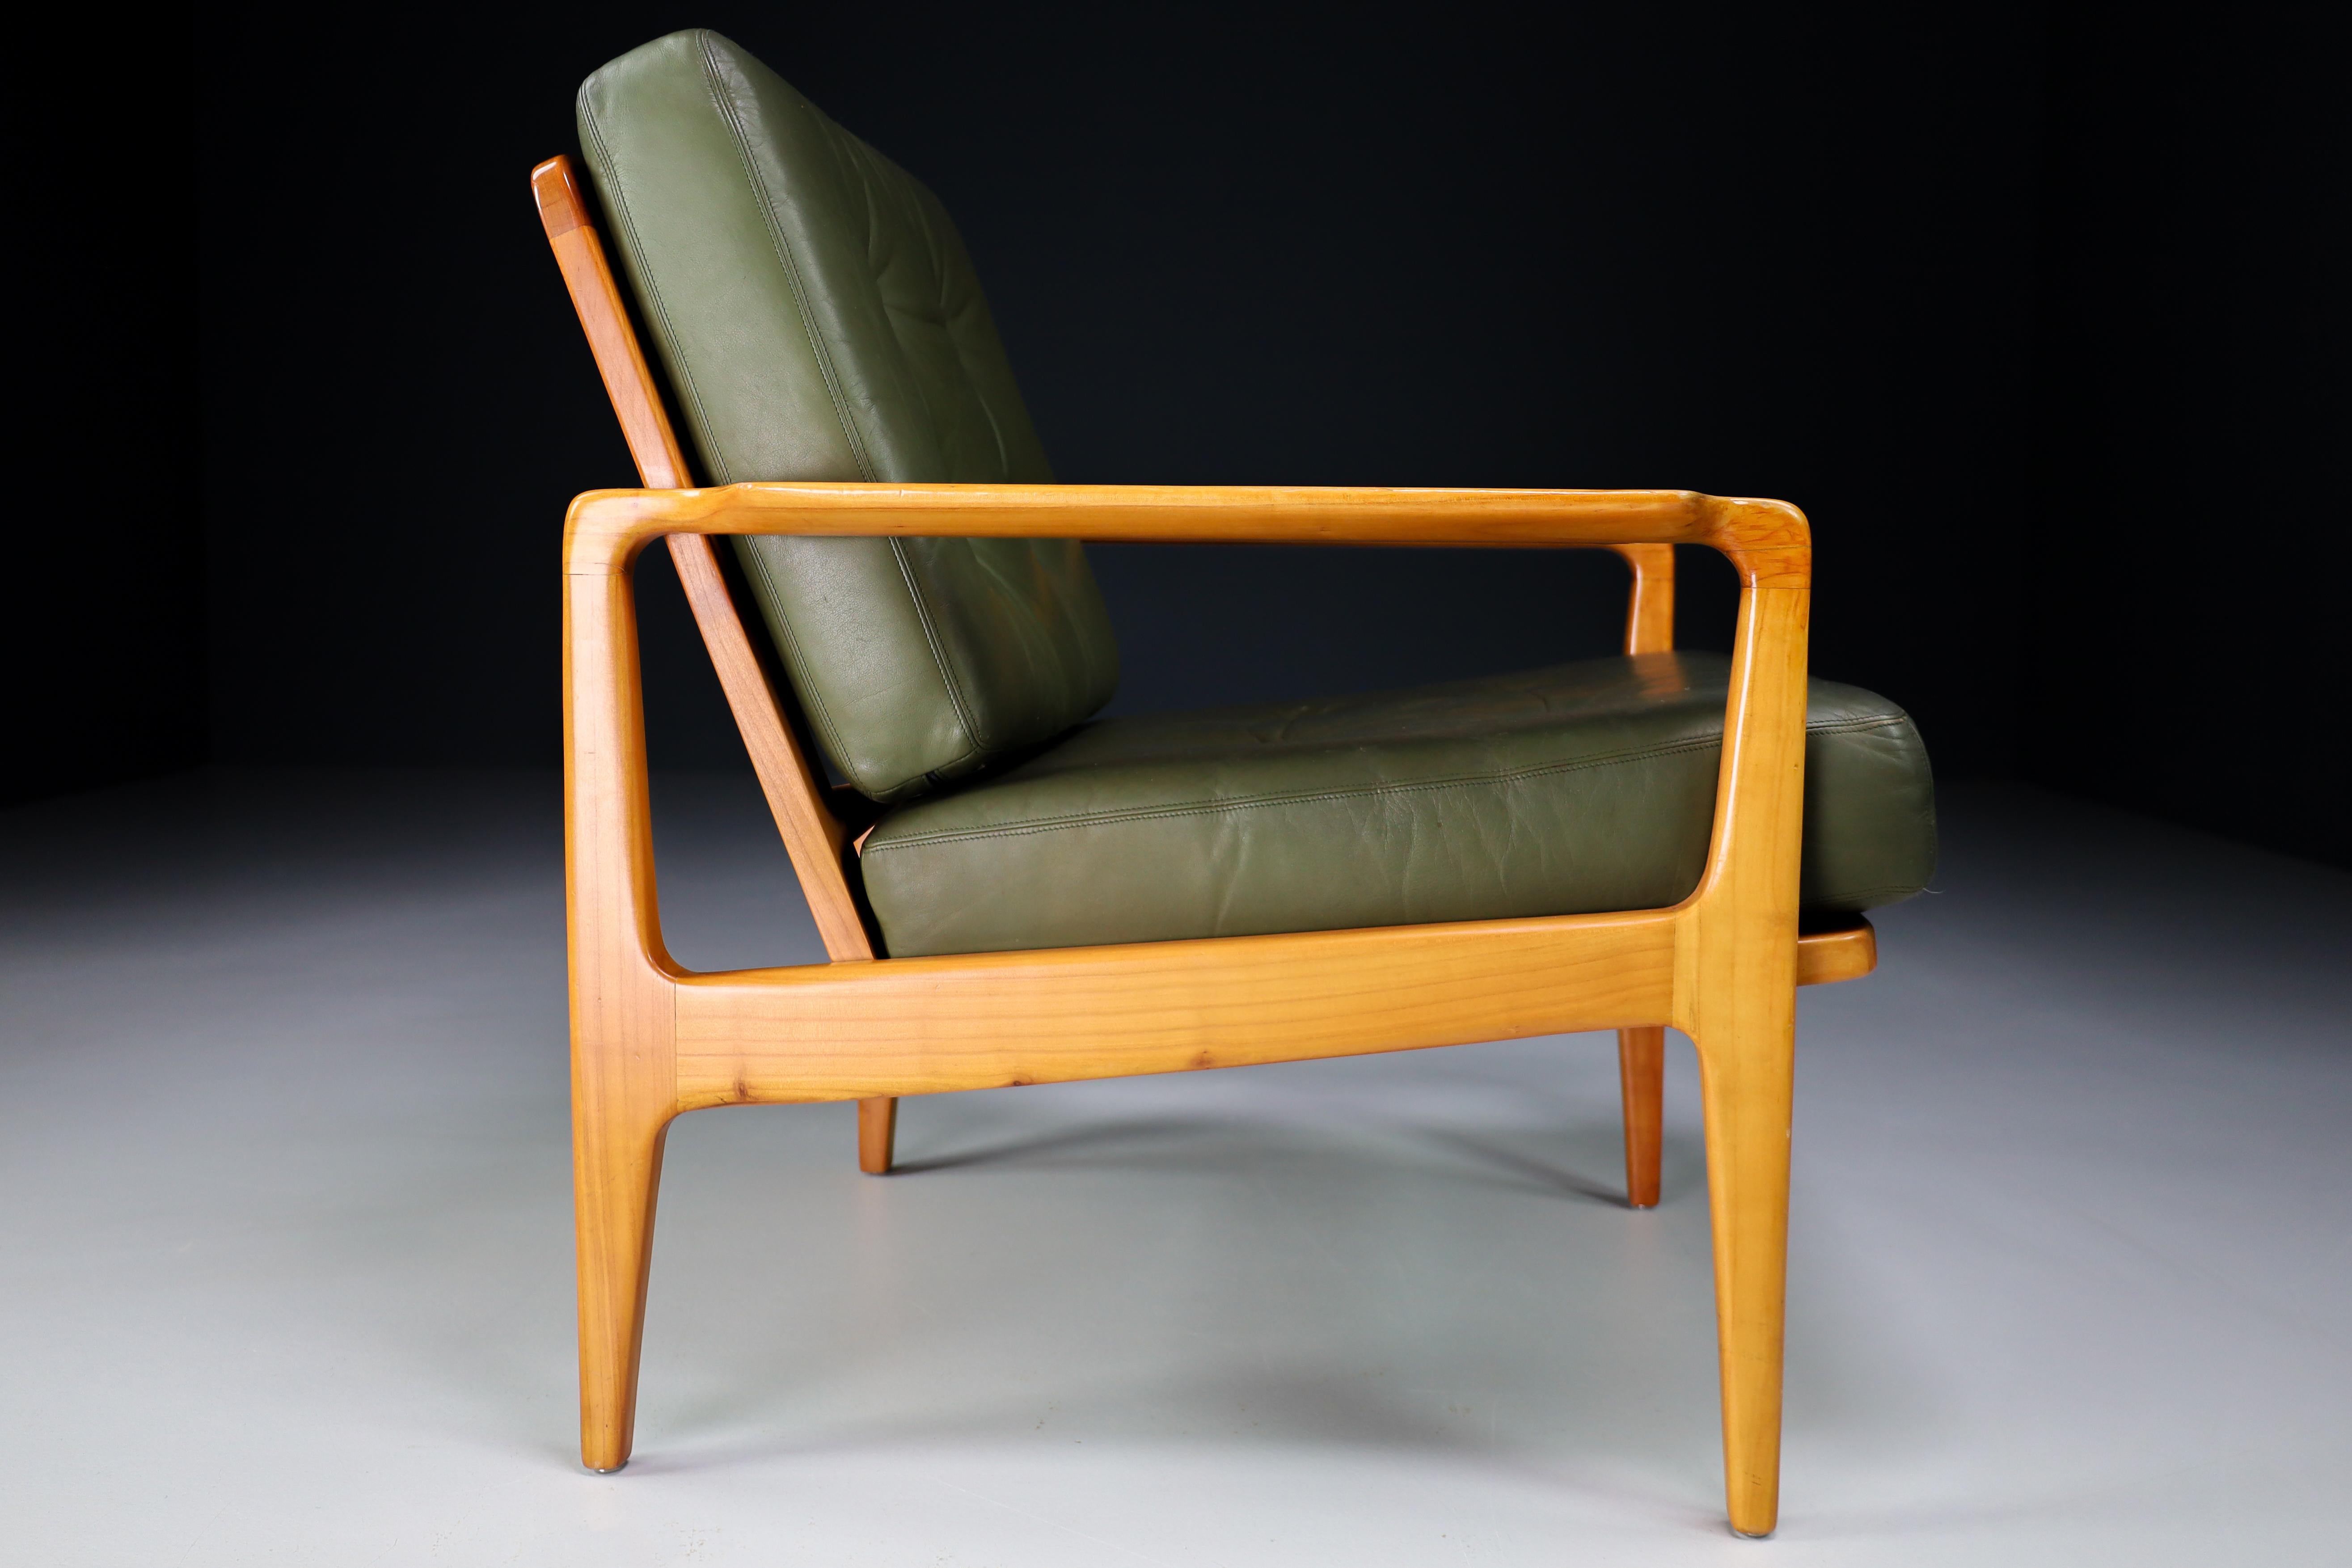 Midcentury Danish Lounge Chairs by Arne Wahl Iversen in Green Leather, 1960s For Sale 1